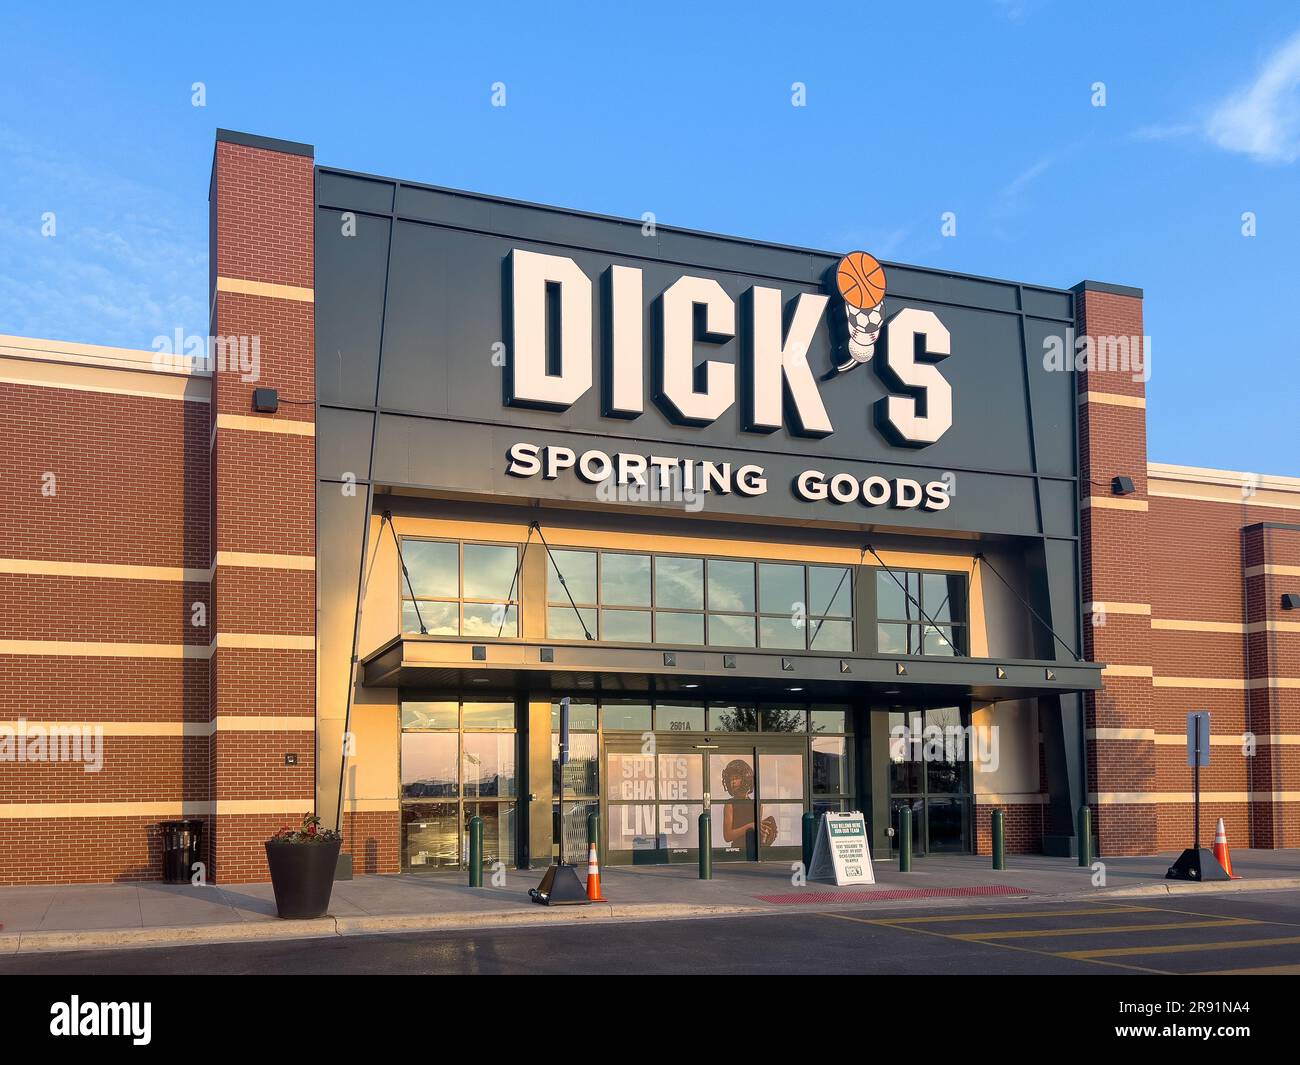 DICK'S Sporting Goods Store in Columbia, MO